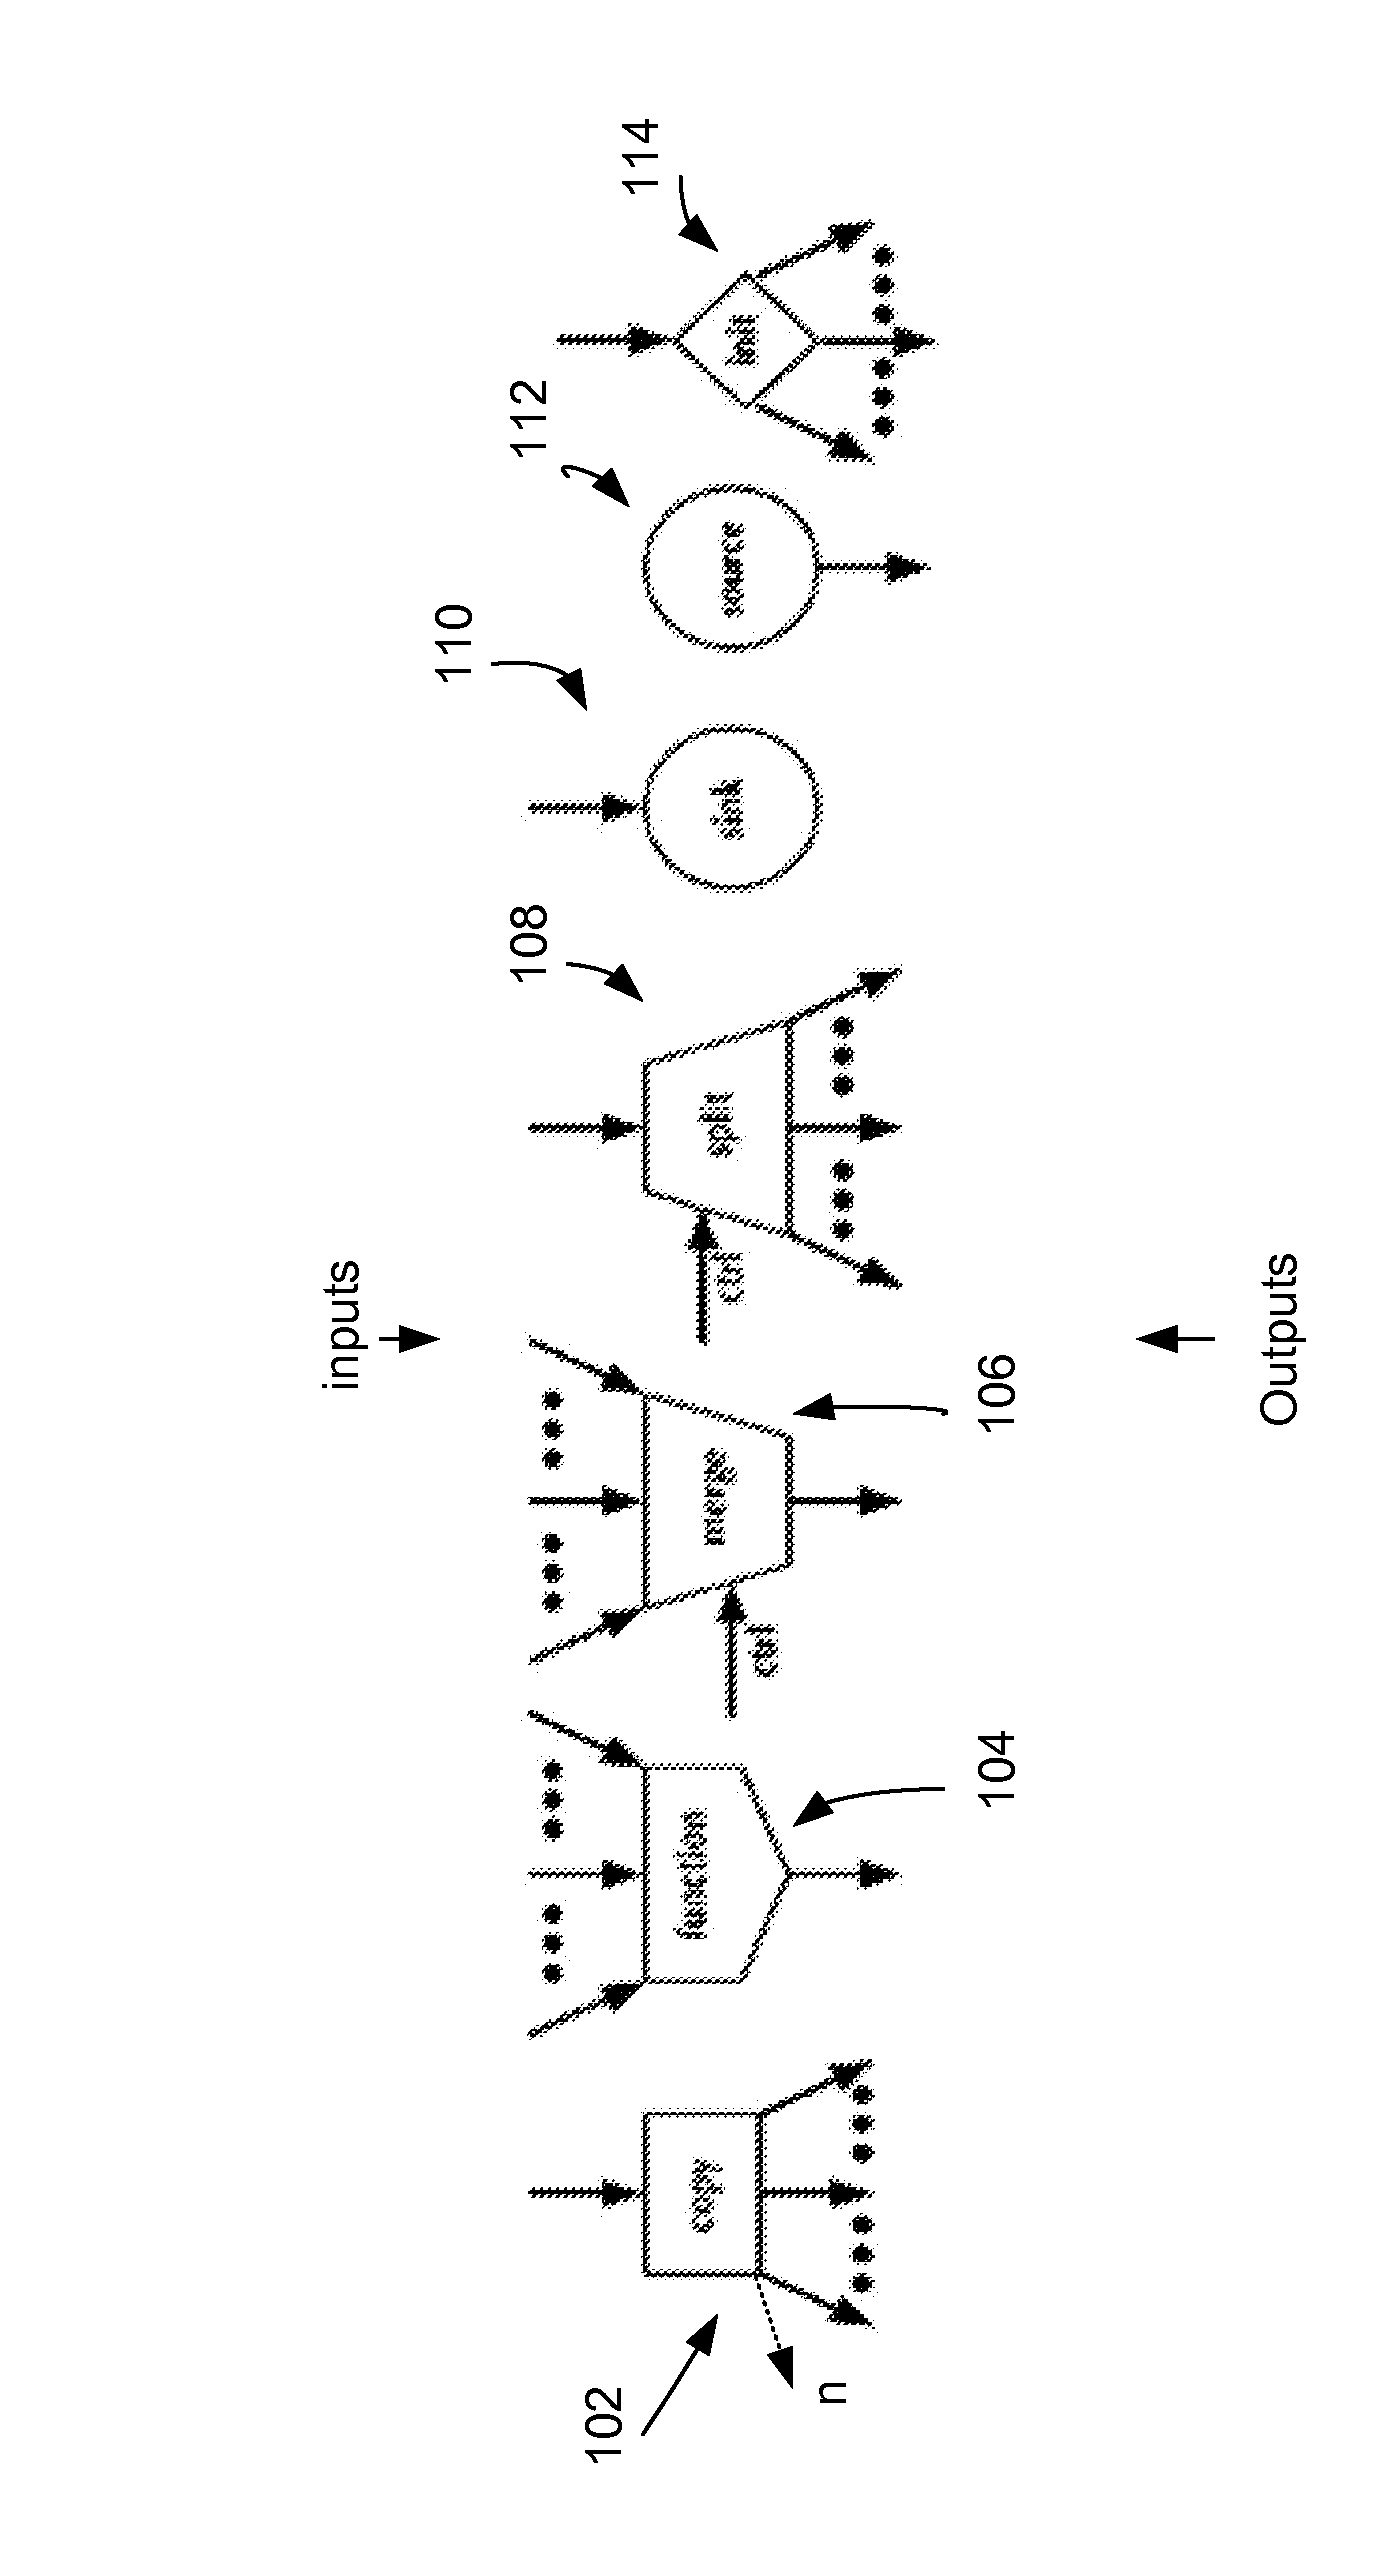 Reconfigurable logic fabrics for integrated circuits and systems and methods for configuring reconfigurable logic fabrics